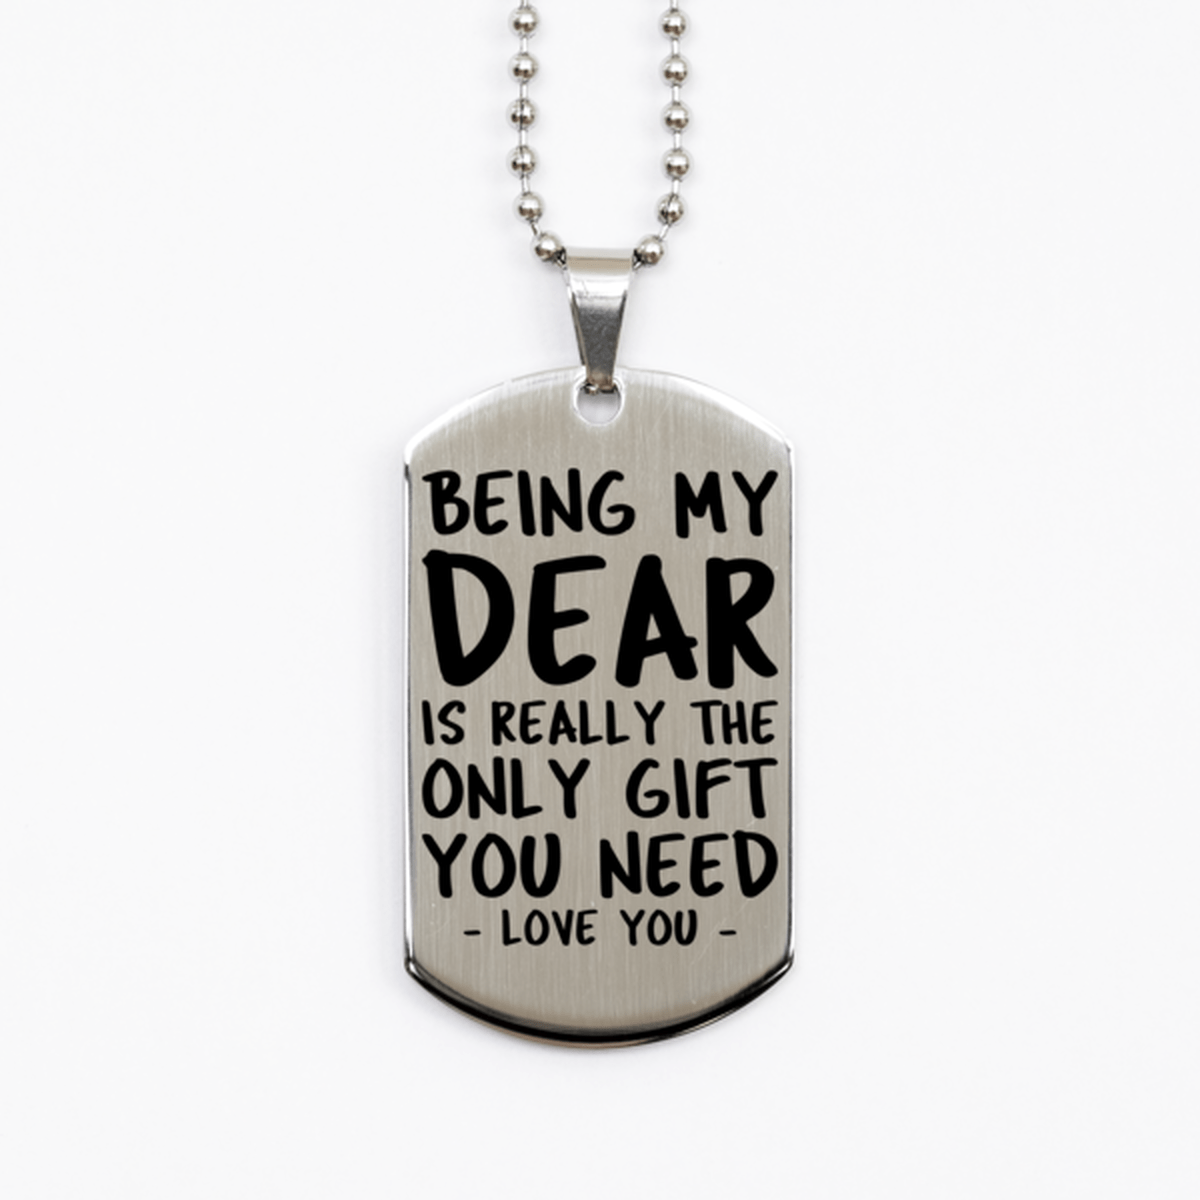 Funny Dear Silver Dog Tag Necklace, Being My Dear Is Really the Only Gift You Need, Best Birthday Gifts for Dear